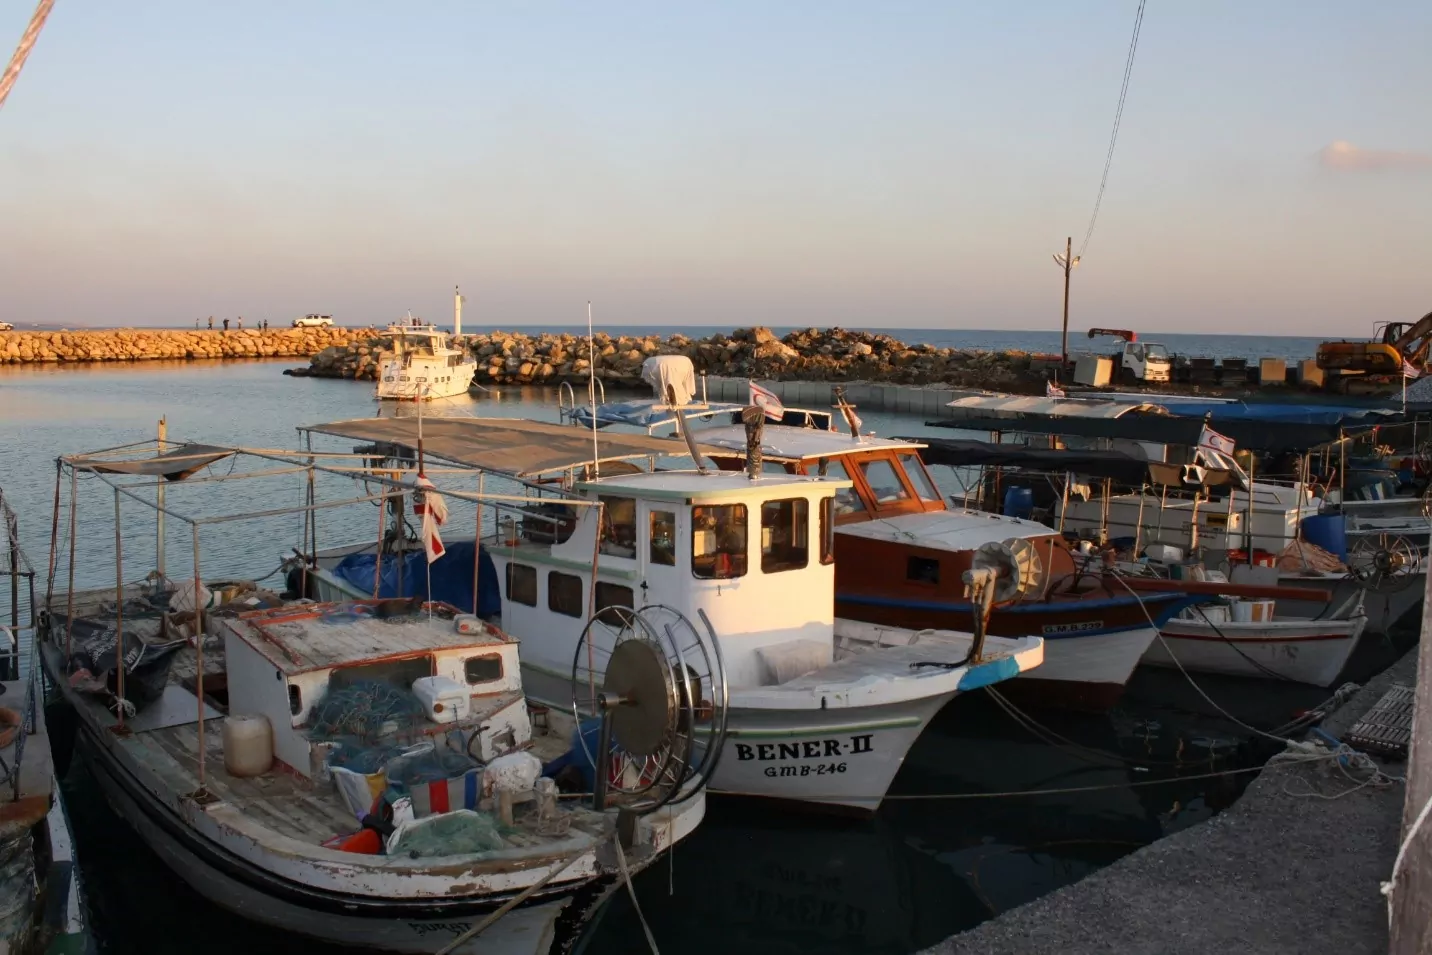 Fishing boats lining the docks in Bogaz Harbour